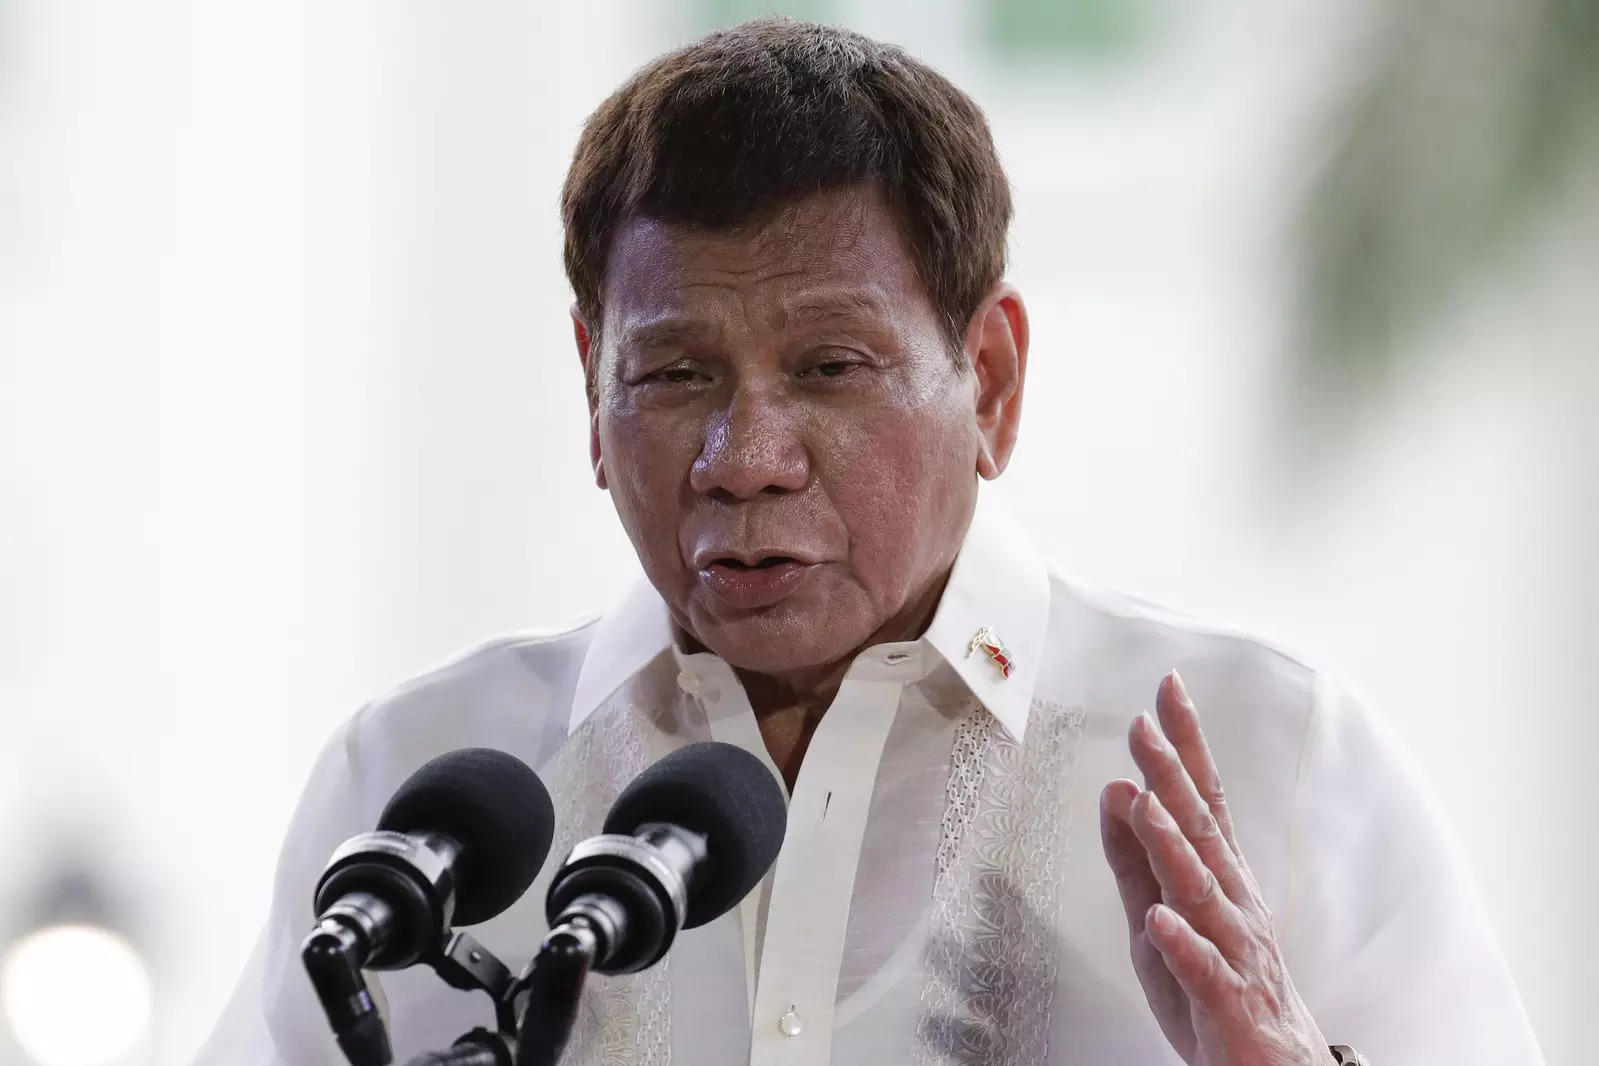   FILE - Philippine President Rodrigo Duterte gestures during a speech at the anniversary of the proclamation of the Philippine independence rites on Saturday, June 12, 2021, at the Provincial Capitol of Bulacan province, Philippines.  Duterte has gone on quarantine after being exposed to a member of his household staff infected with the coronavirus but he has twice tested negative for the virus after exposure over the weekend, his said Thursday, Feb.  4, 2022. (AP Photo/Aaron Favila)